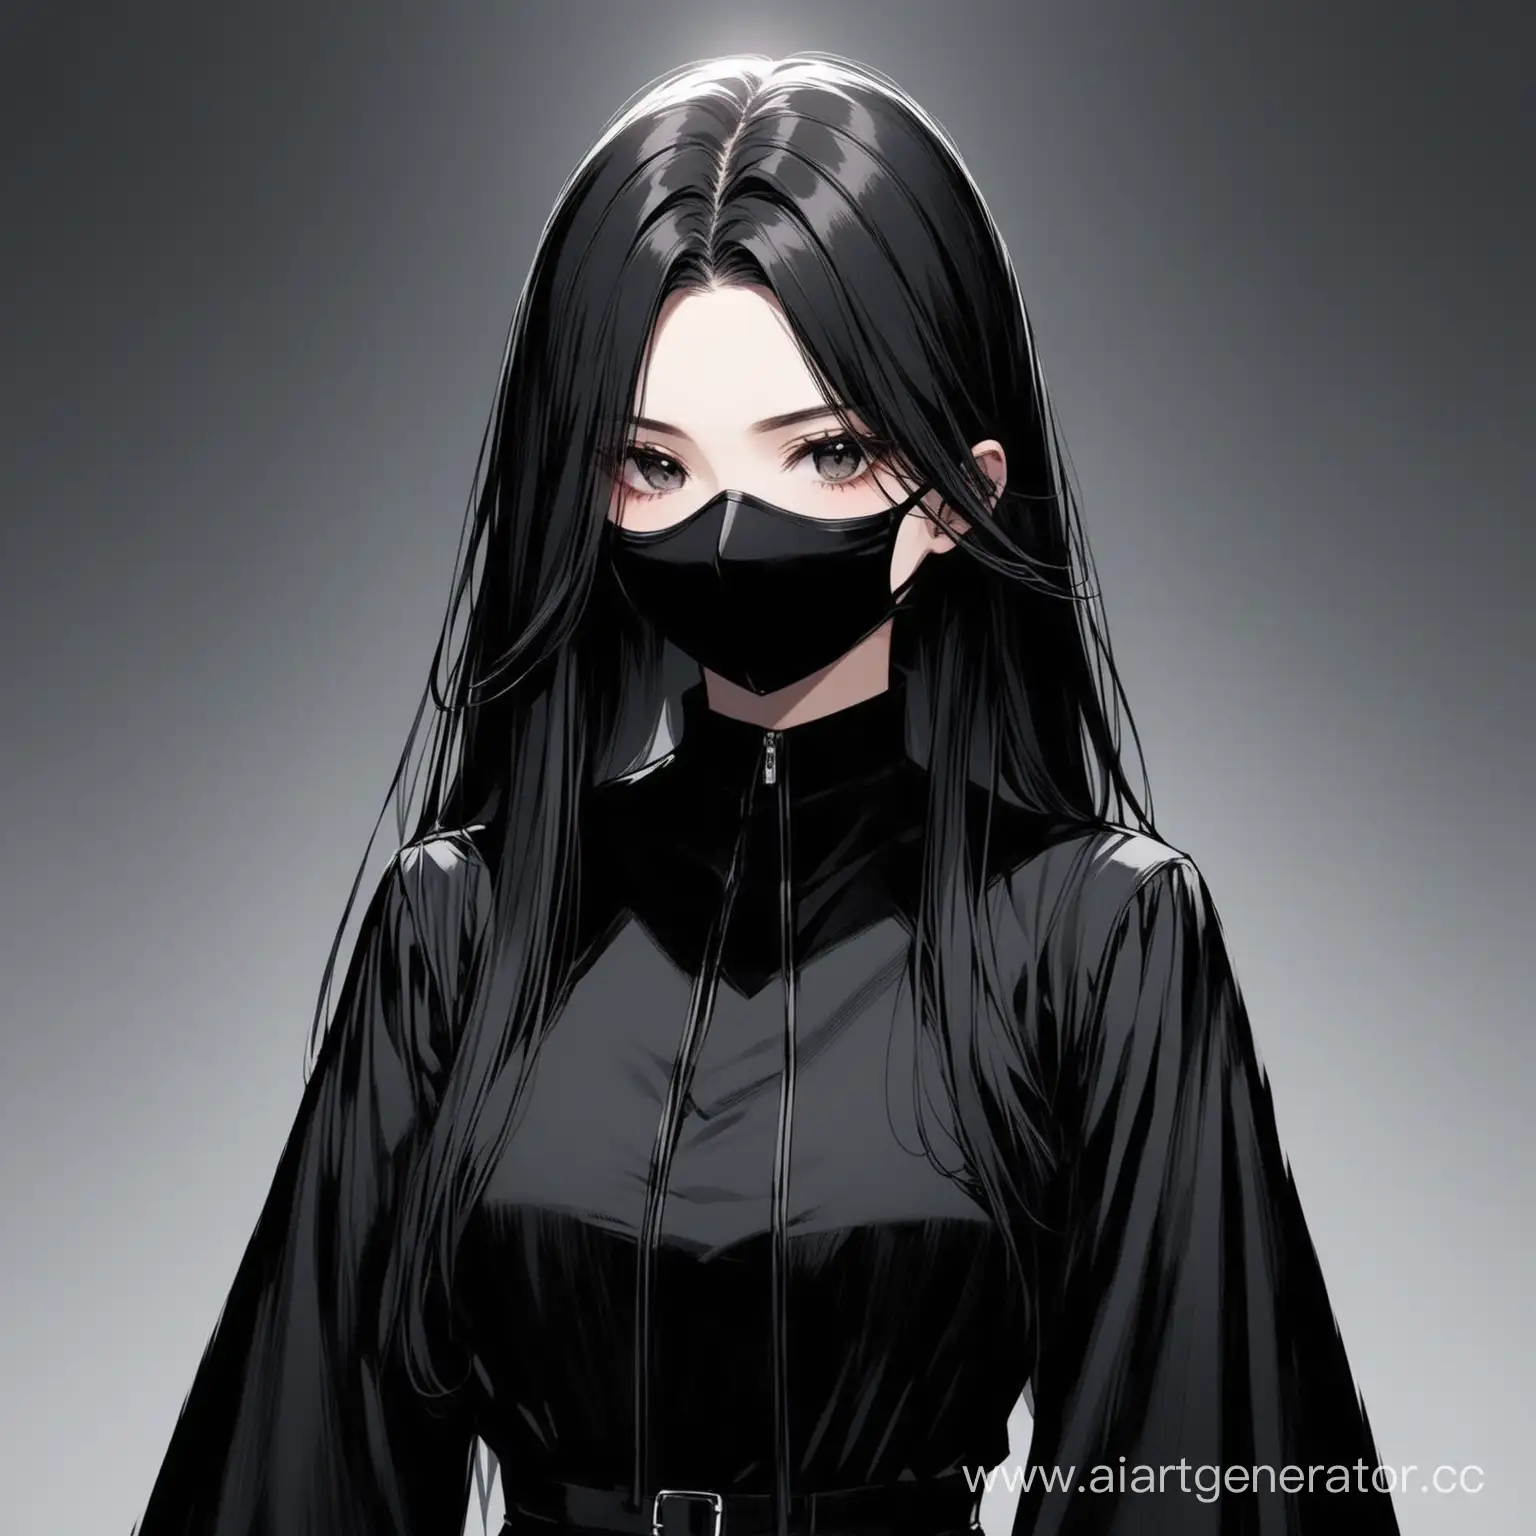 Mysterious-Girl-in-Black-Clothing-Hair-and-Mask